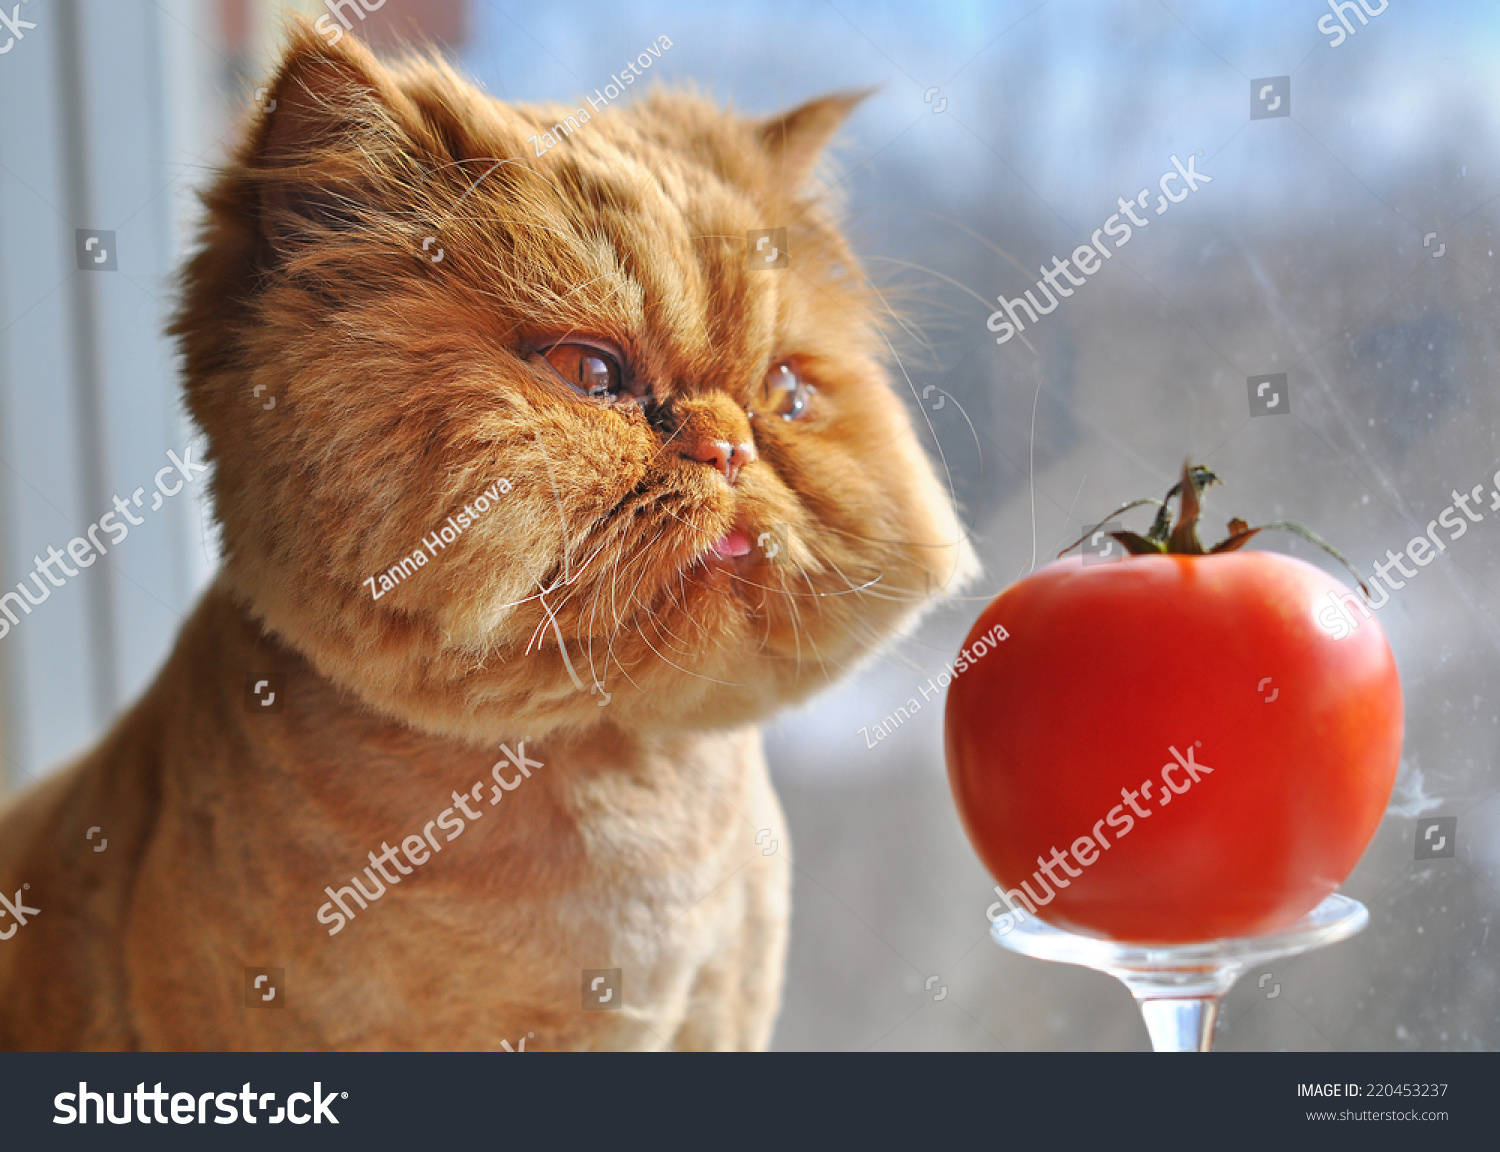 Funny cat and red tomato #220453237